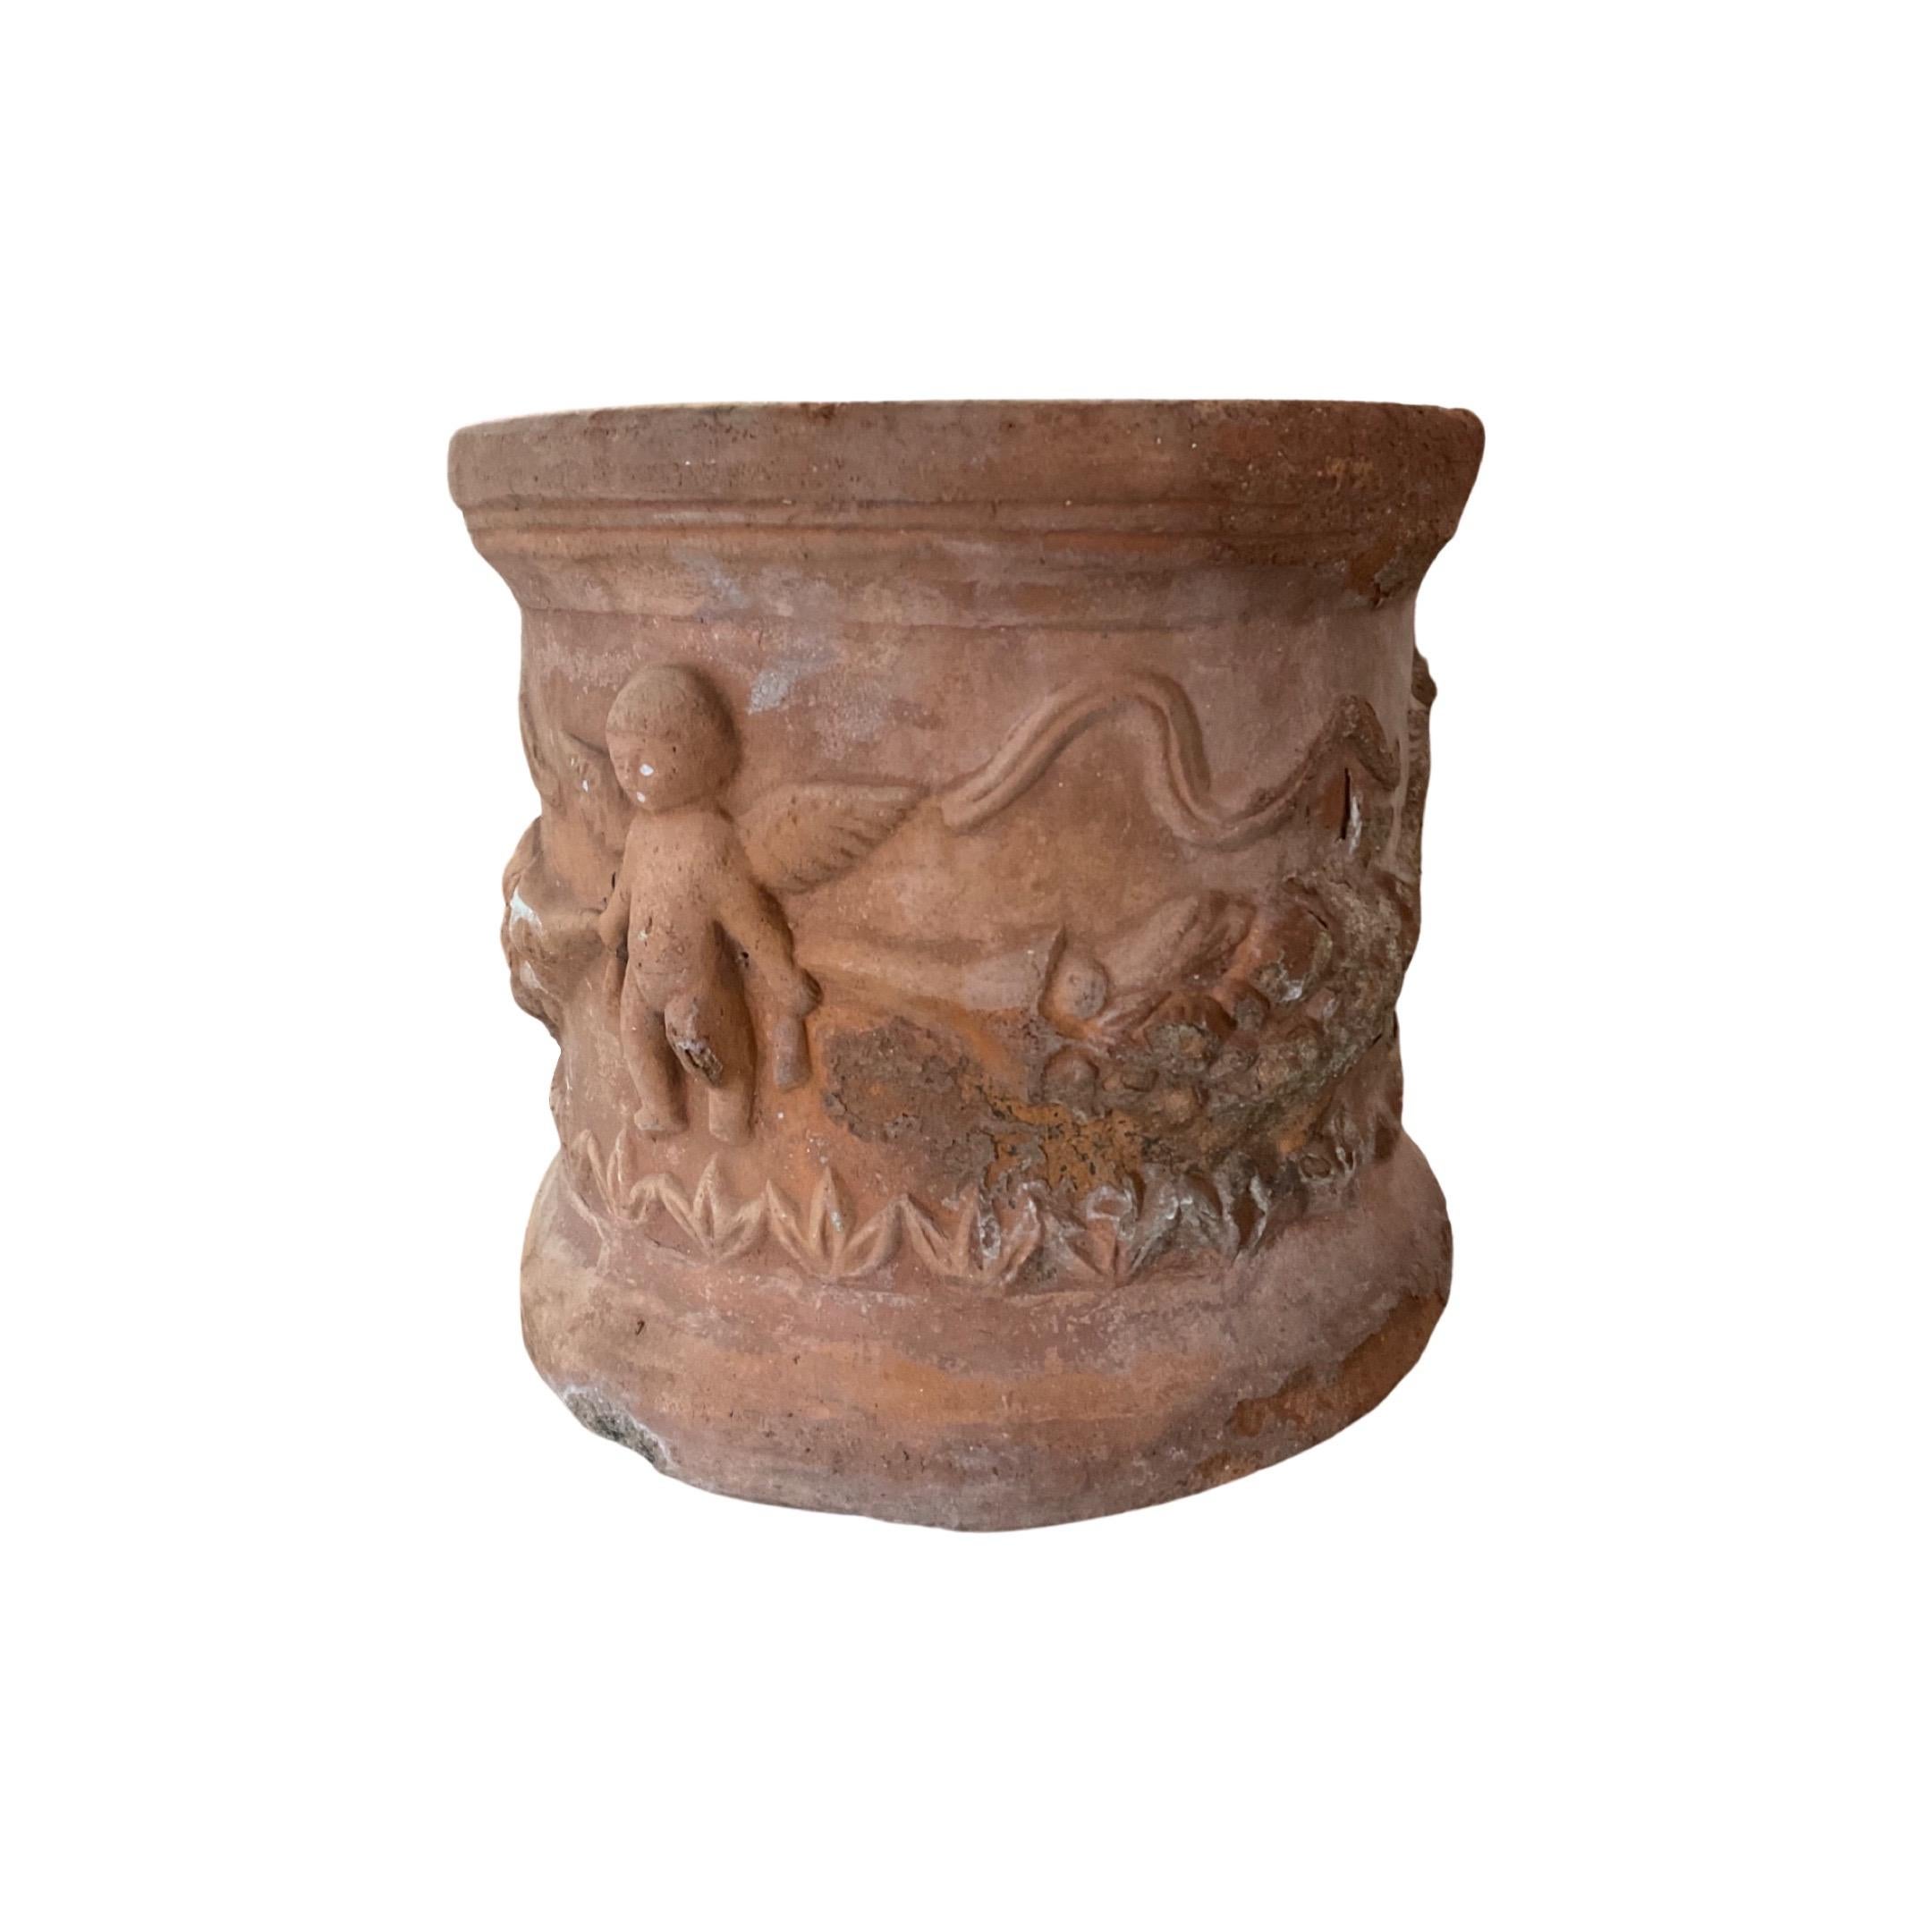 This English terracotta planter set is perfect for adding a touch of classic elegance to your garden. Crafted in the 1880s in England, these planters are made from terracotta giving them a timeless, durable look. Each set includes two planters with